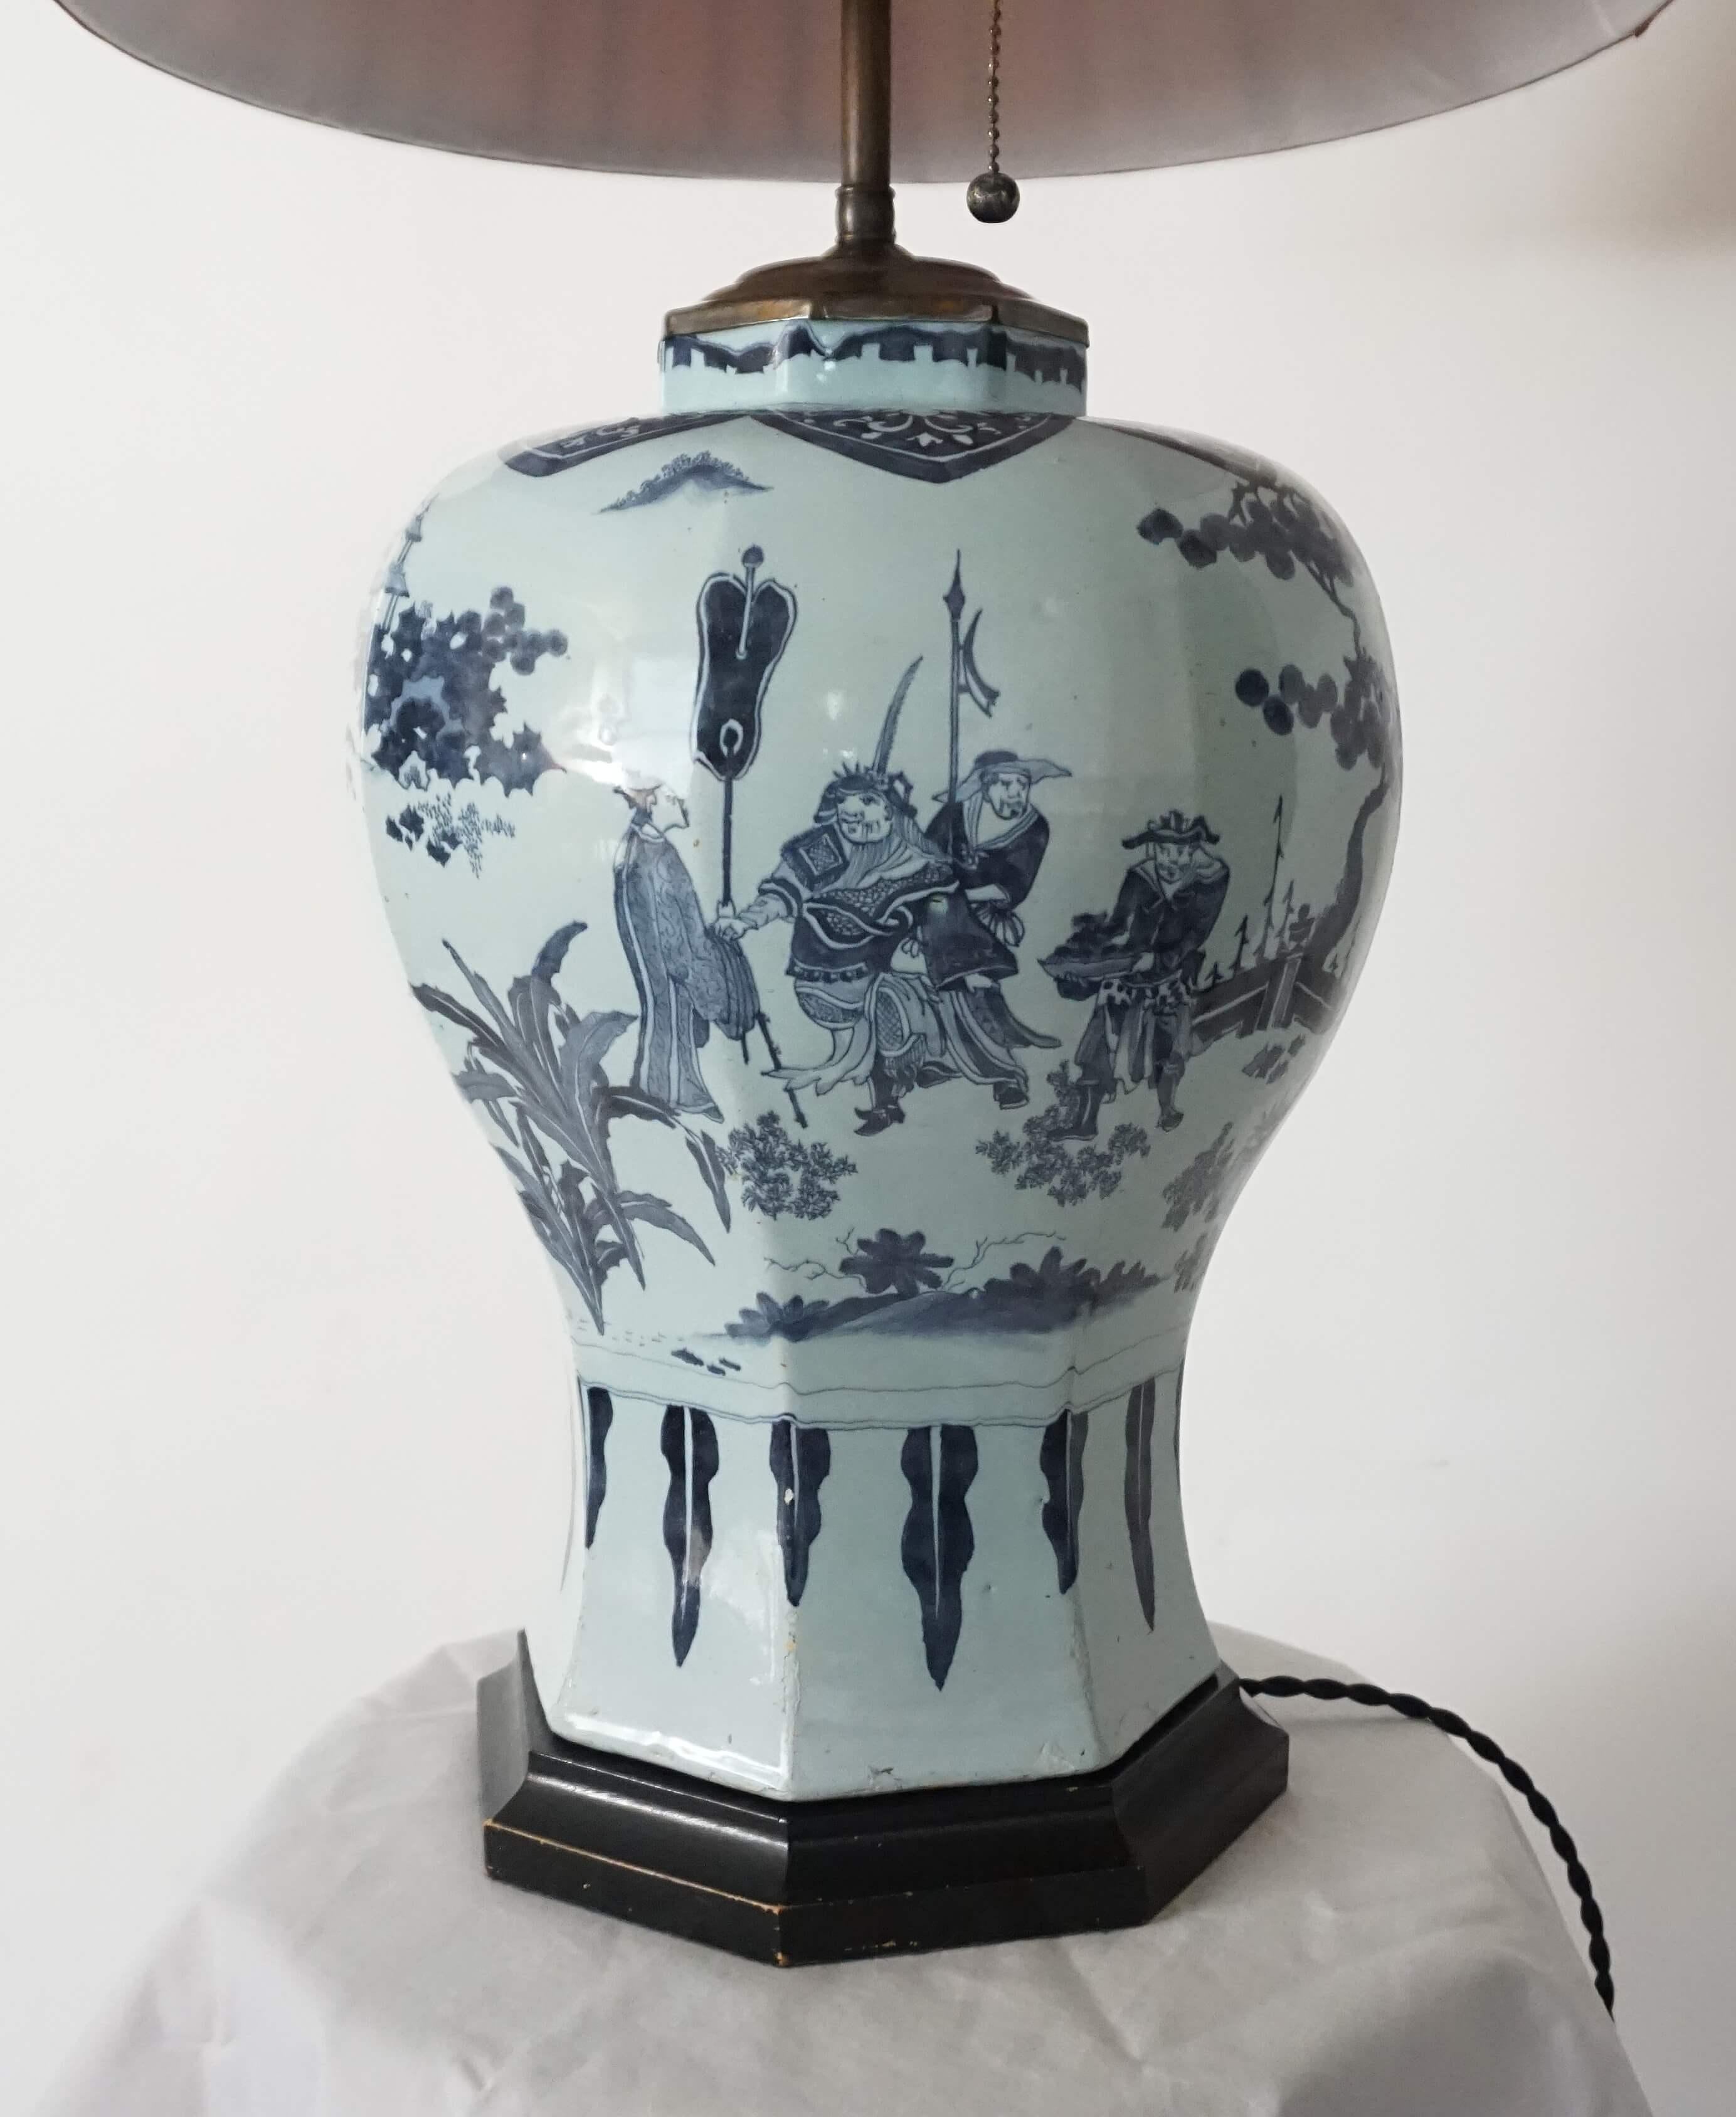 A large circa 1670 Dutch delft octagonal baluster form vase having all-over underglaze blue Ming-style chinoiserie landscape and figural designs on bluish-white body converted for use as a table lamp with patinated brass fittings and black-painted